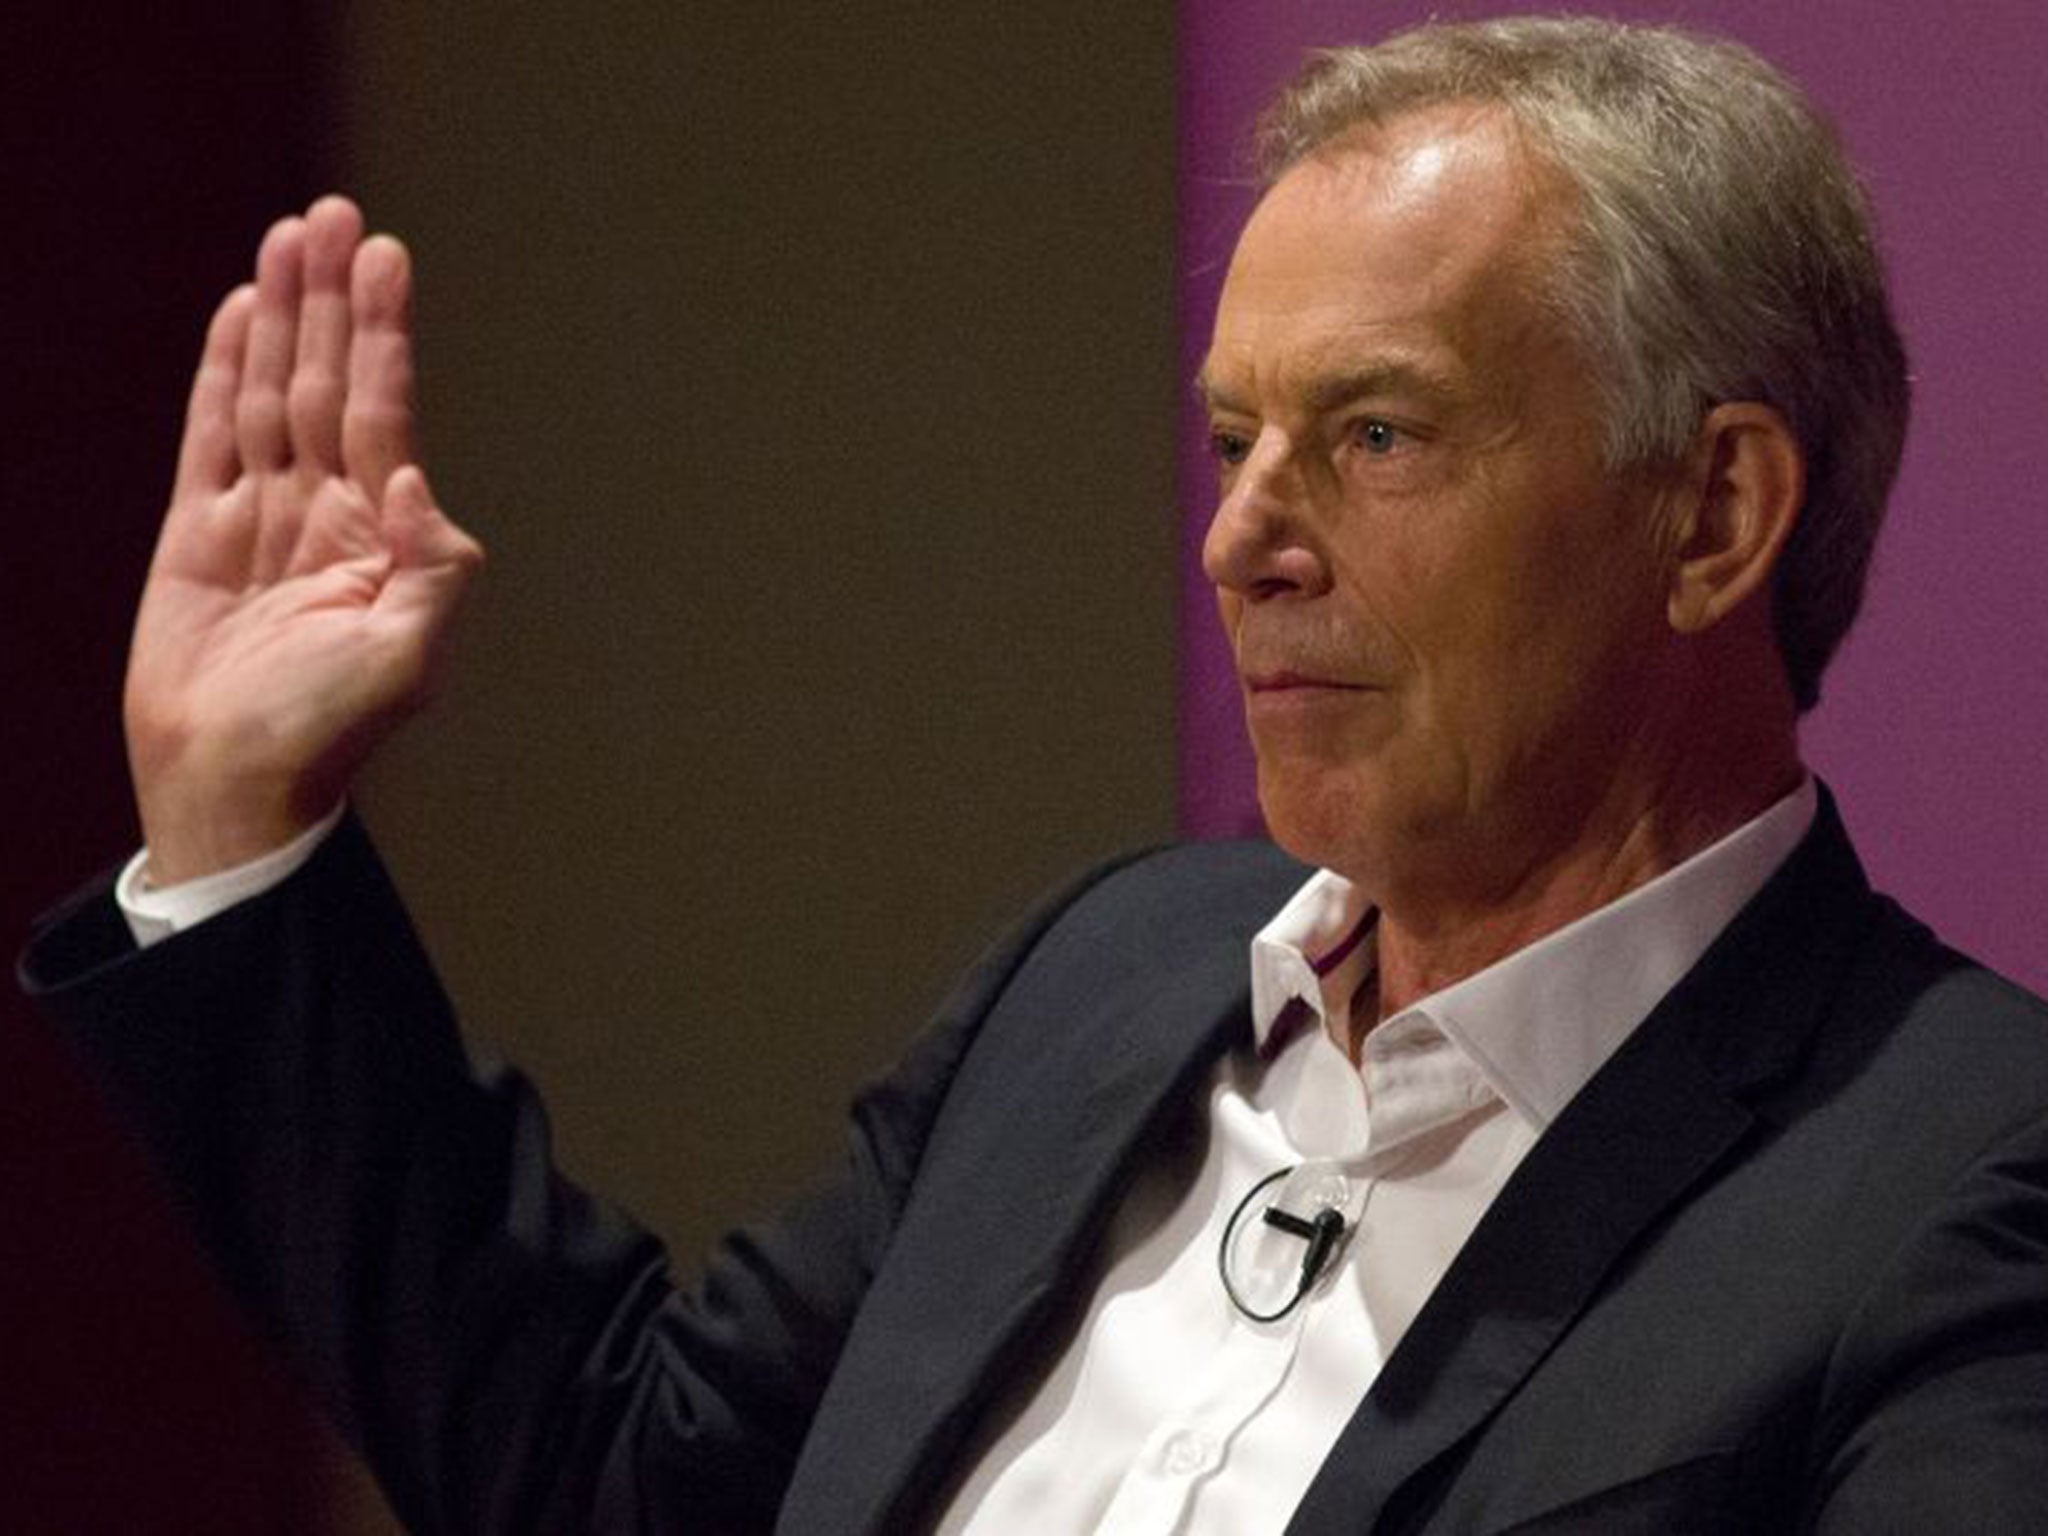 Tony Blair has insisted he wants the Chilcot inquiry to publish its findings as soon as possible